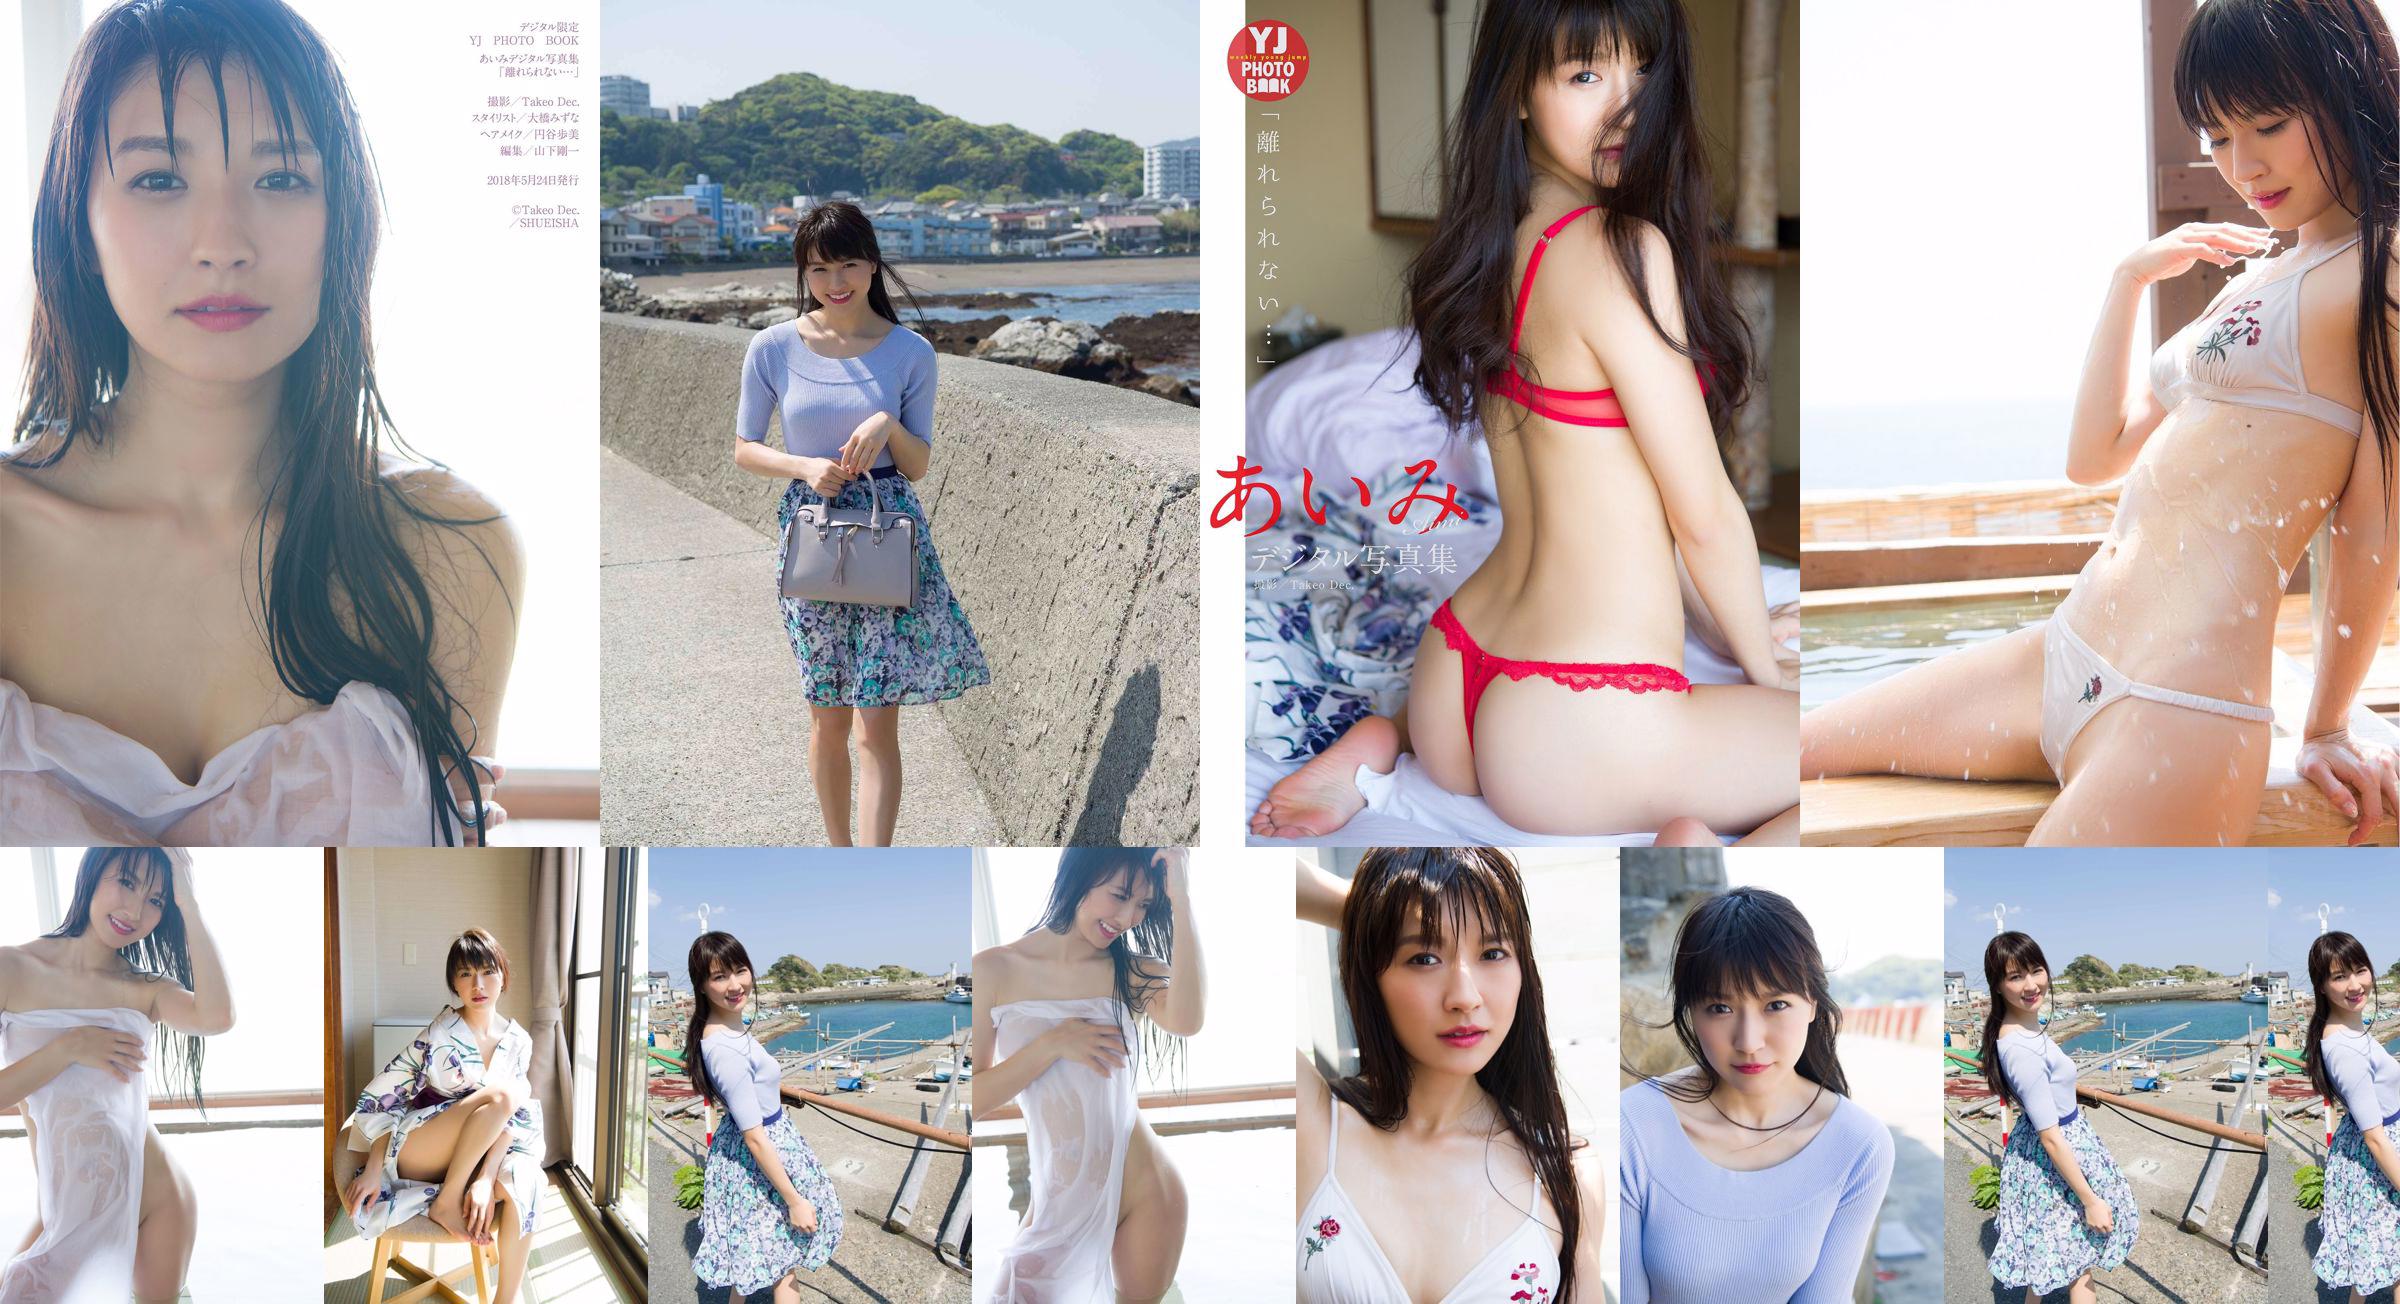 Aimi Nakano "I can't leave ..." [Digital Limited YJ PHOTO BOOK] No.7b9043 Page 3